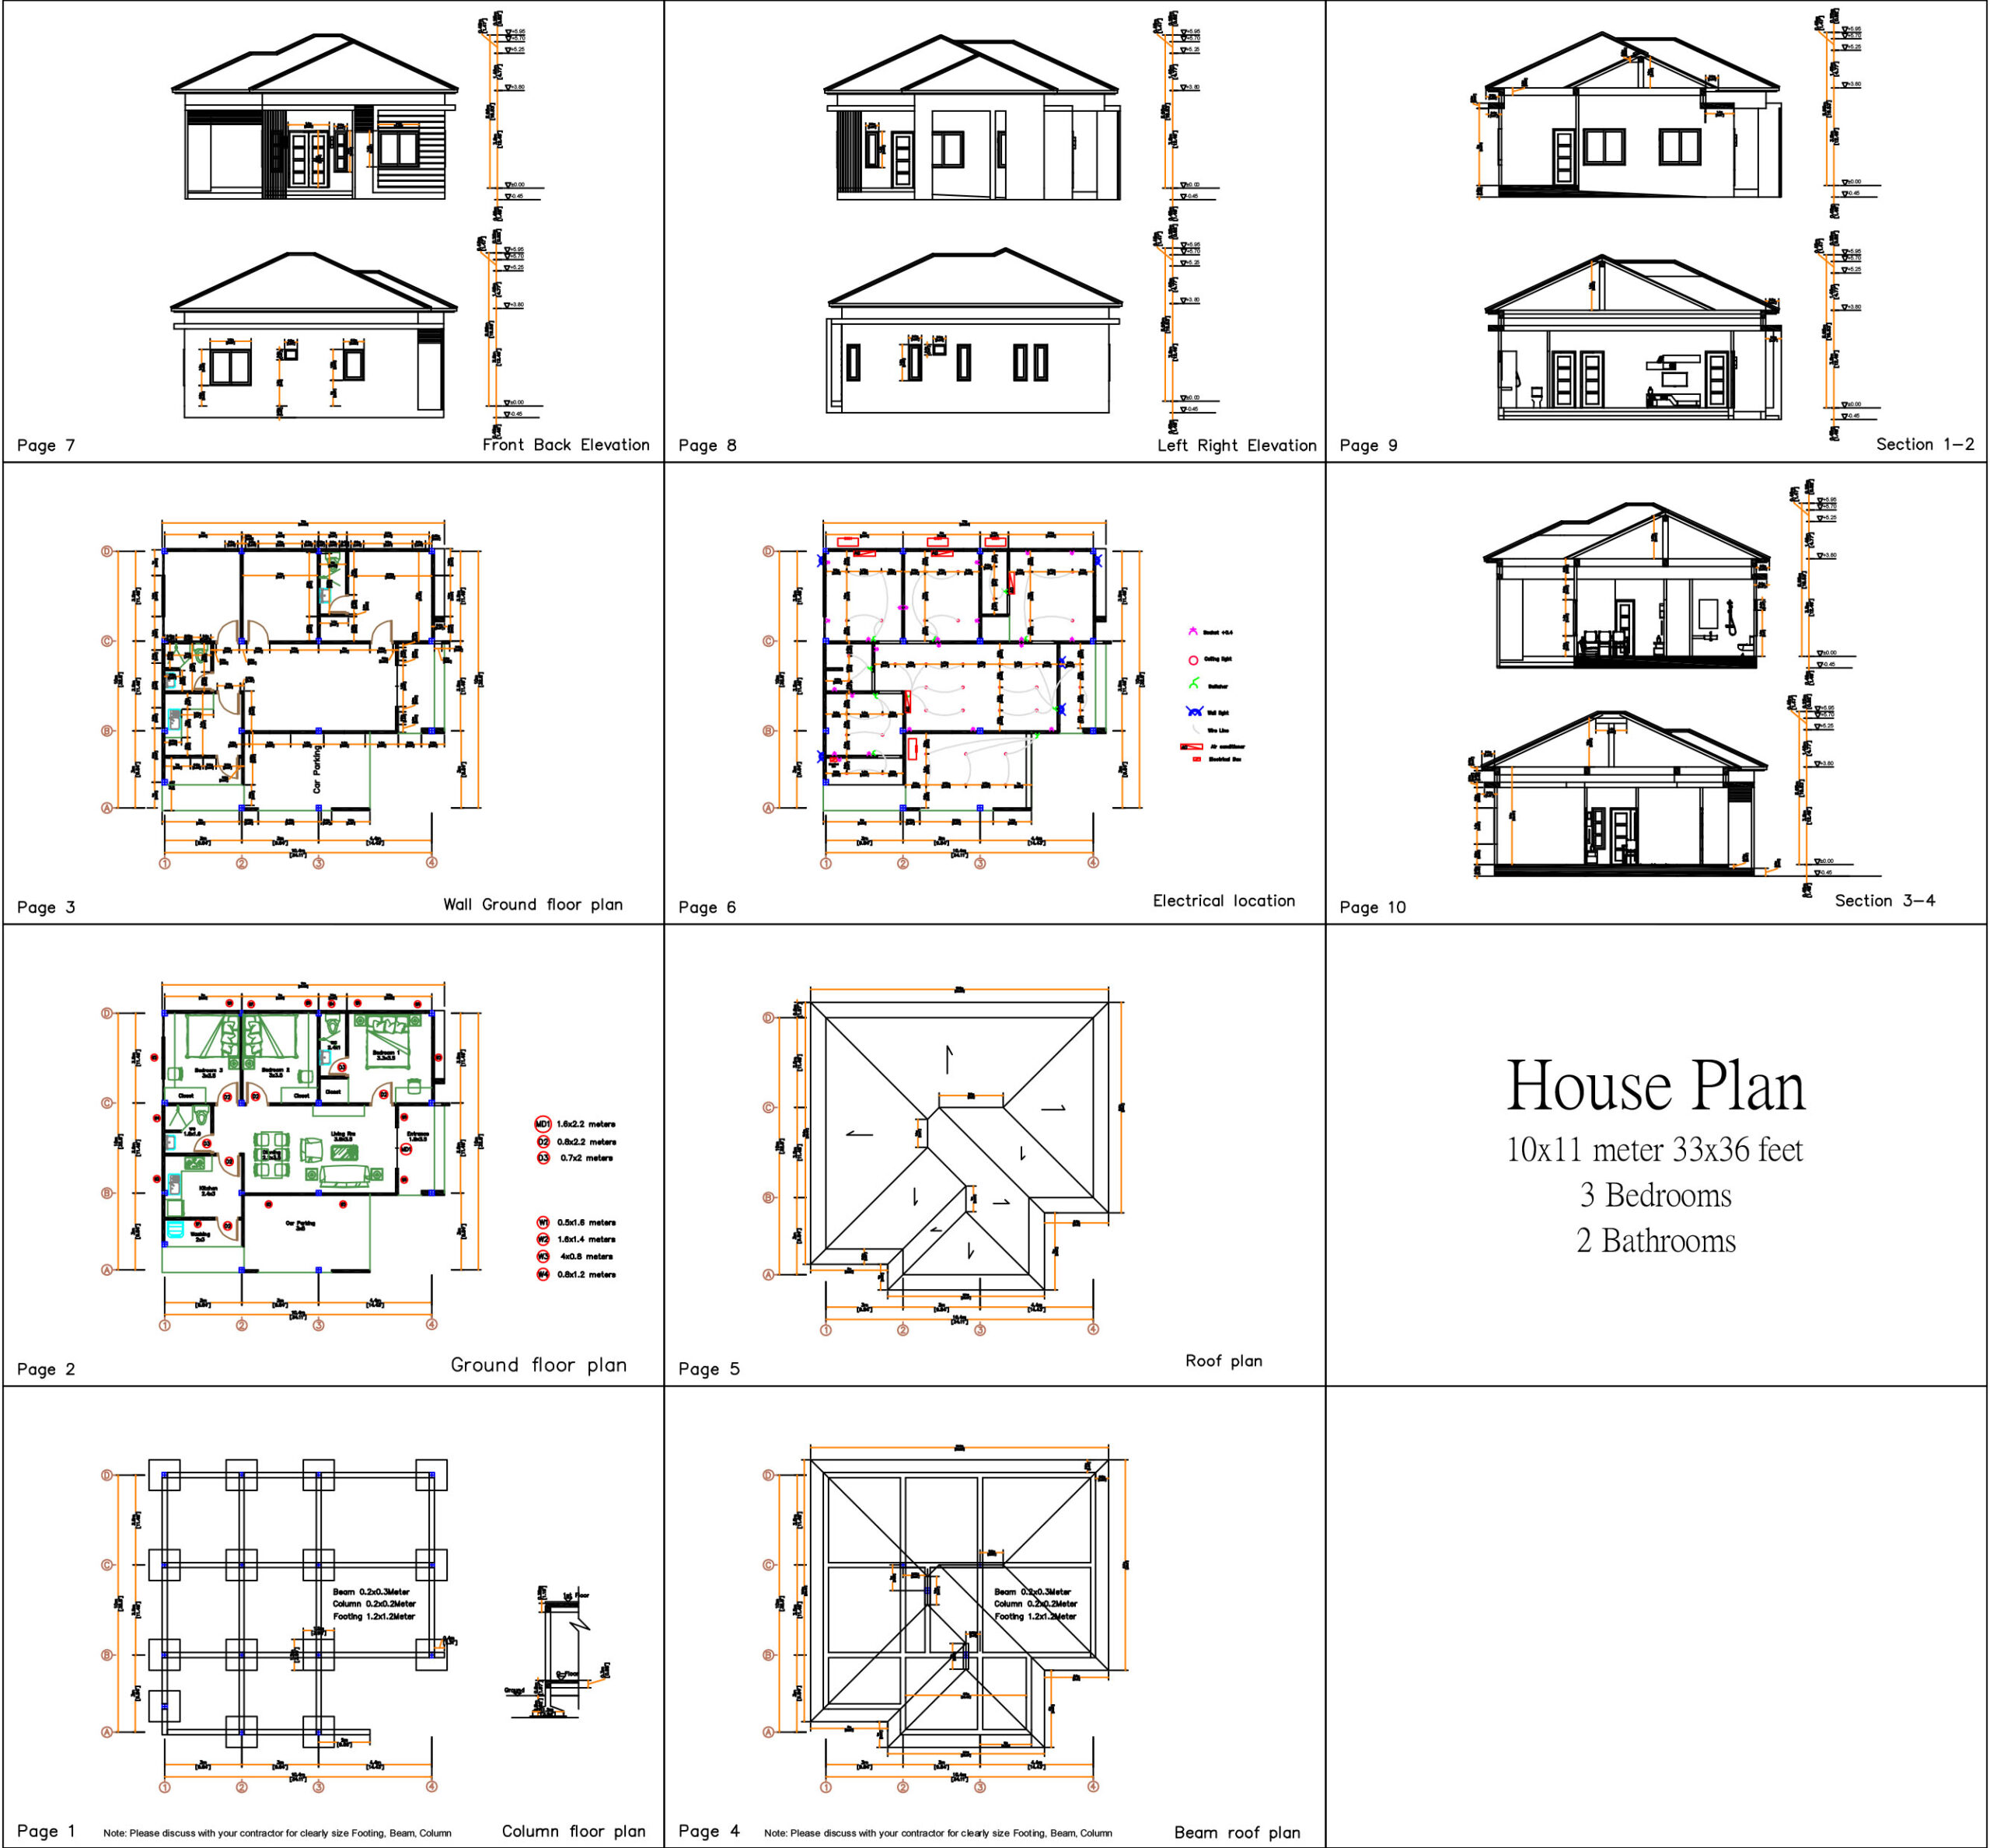 Small House Plan 10x11 Meter 33x36 Feet 3 Bedrooms Hip Roof PDF Full Plan all